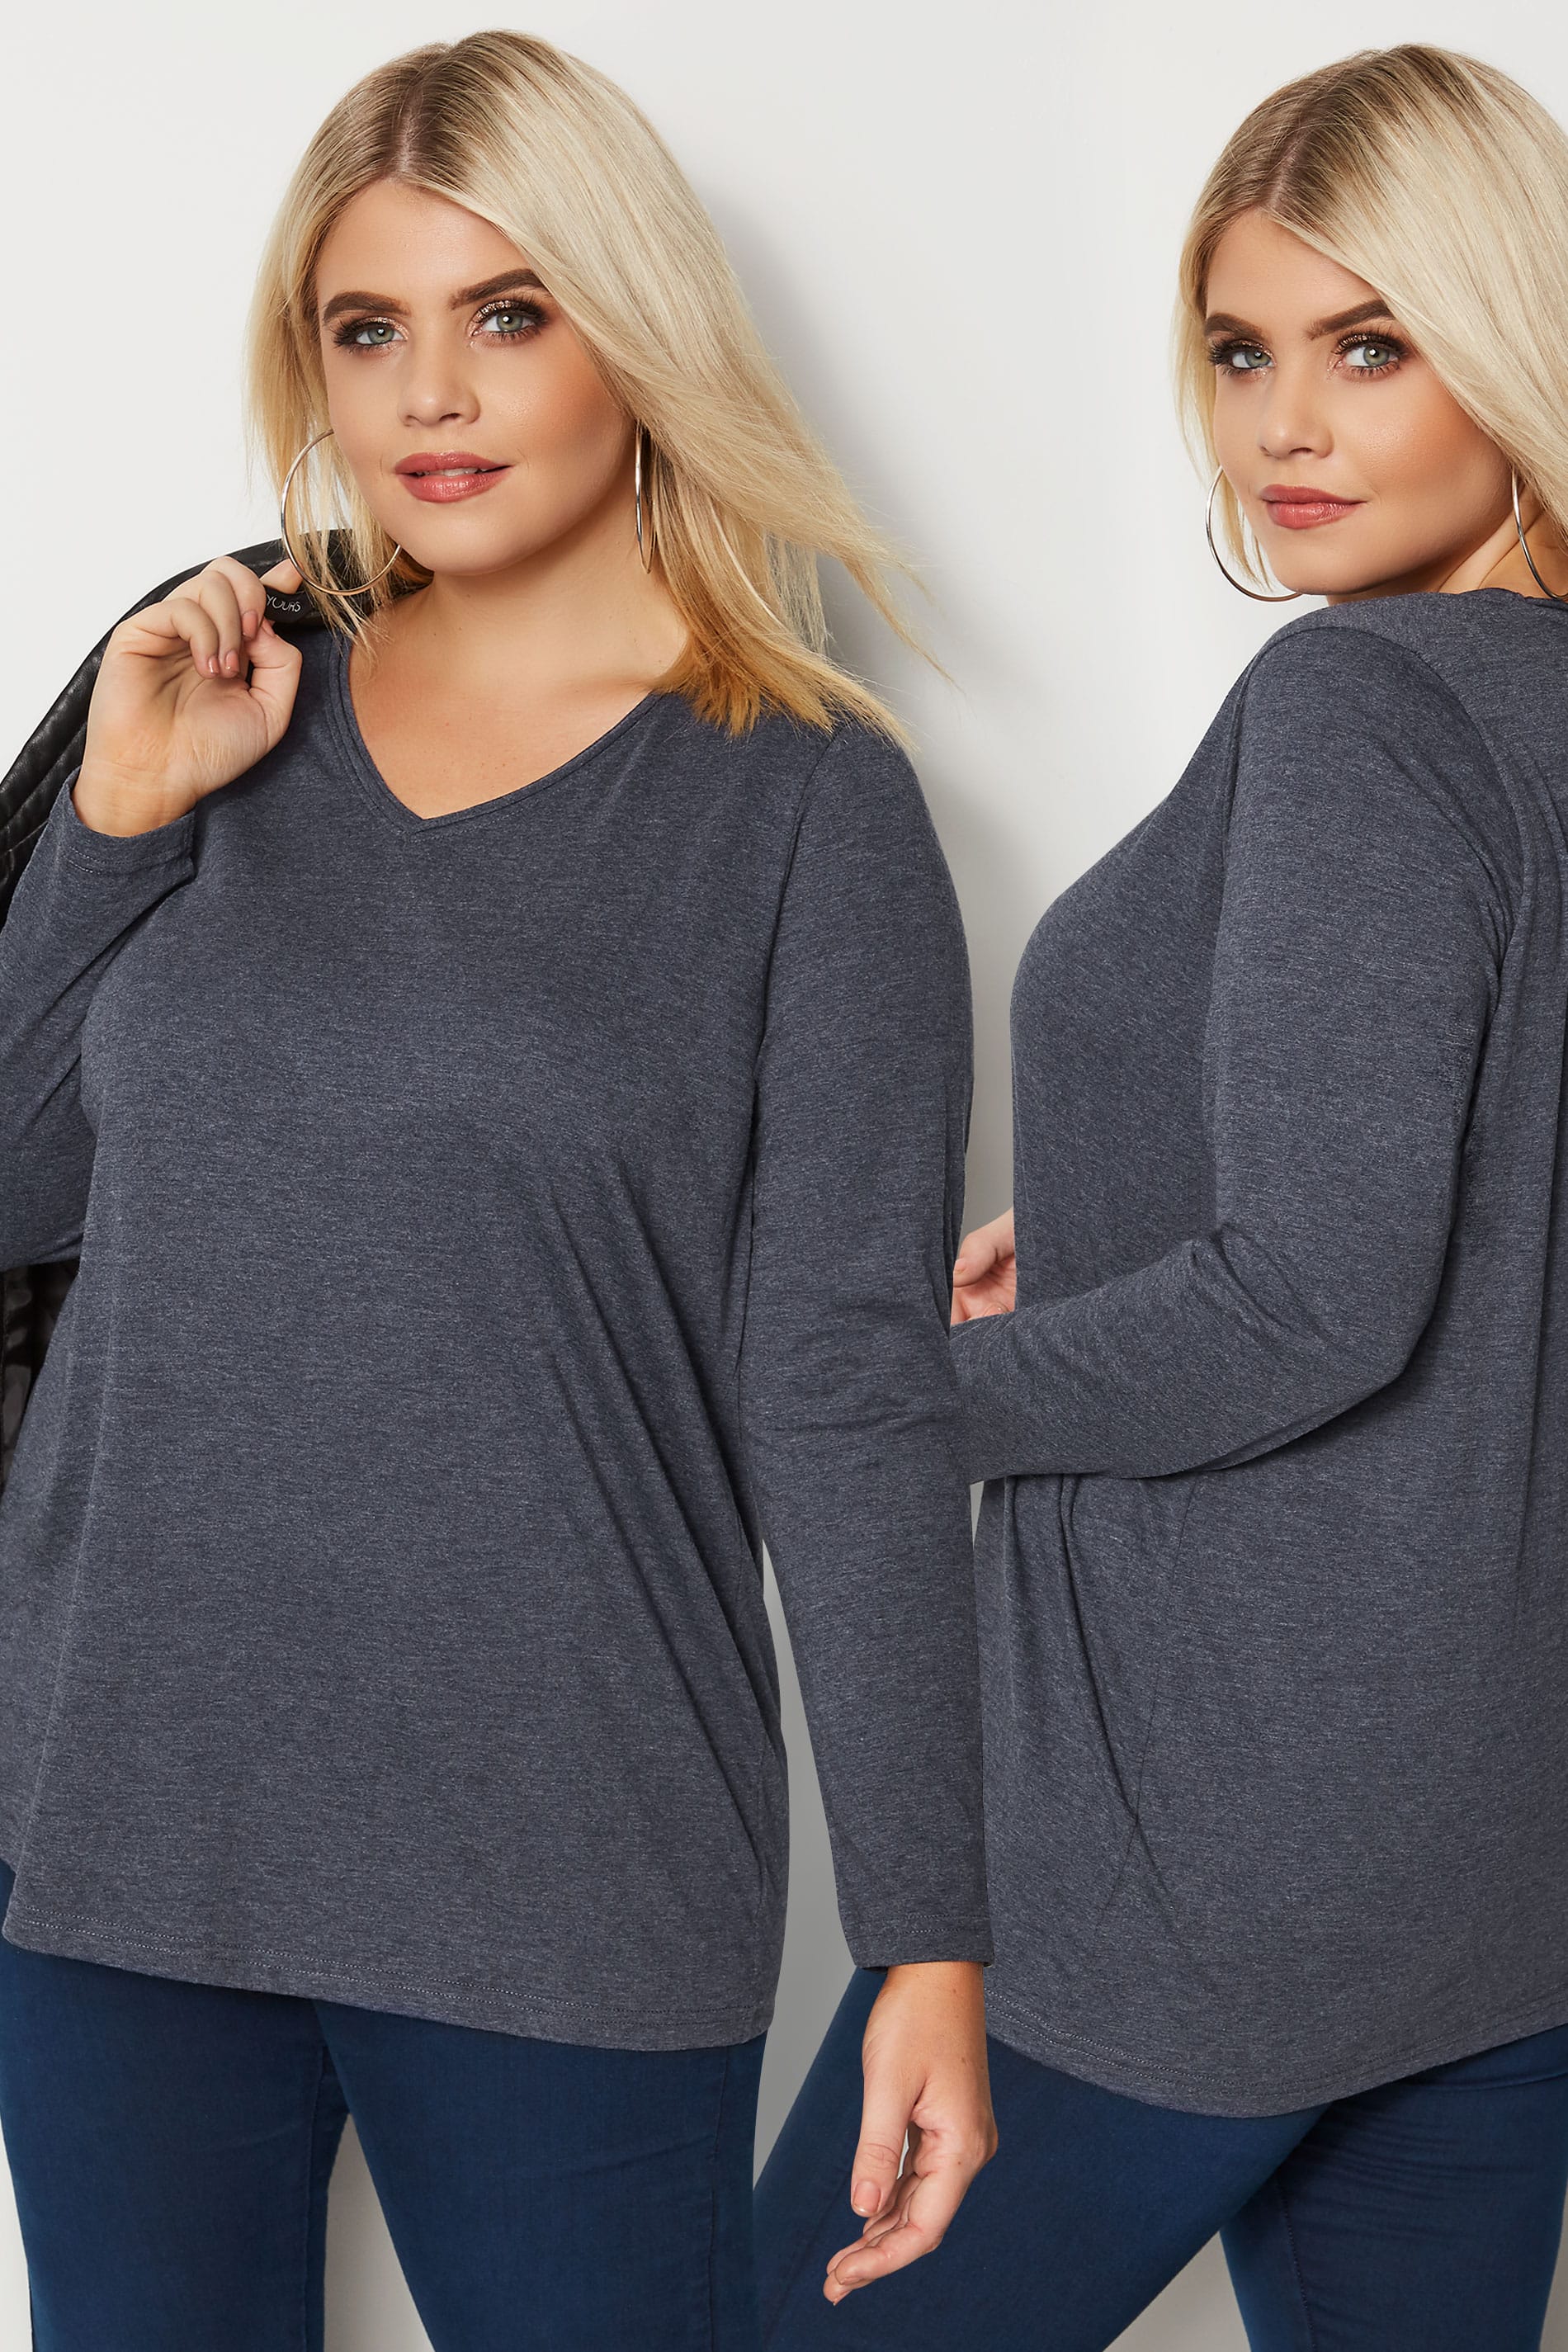 Download Dark Blue Long Sleeved V-Neck Jersey Top, plus size 16 to 36